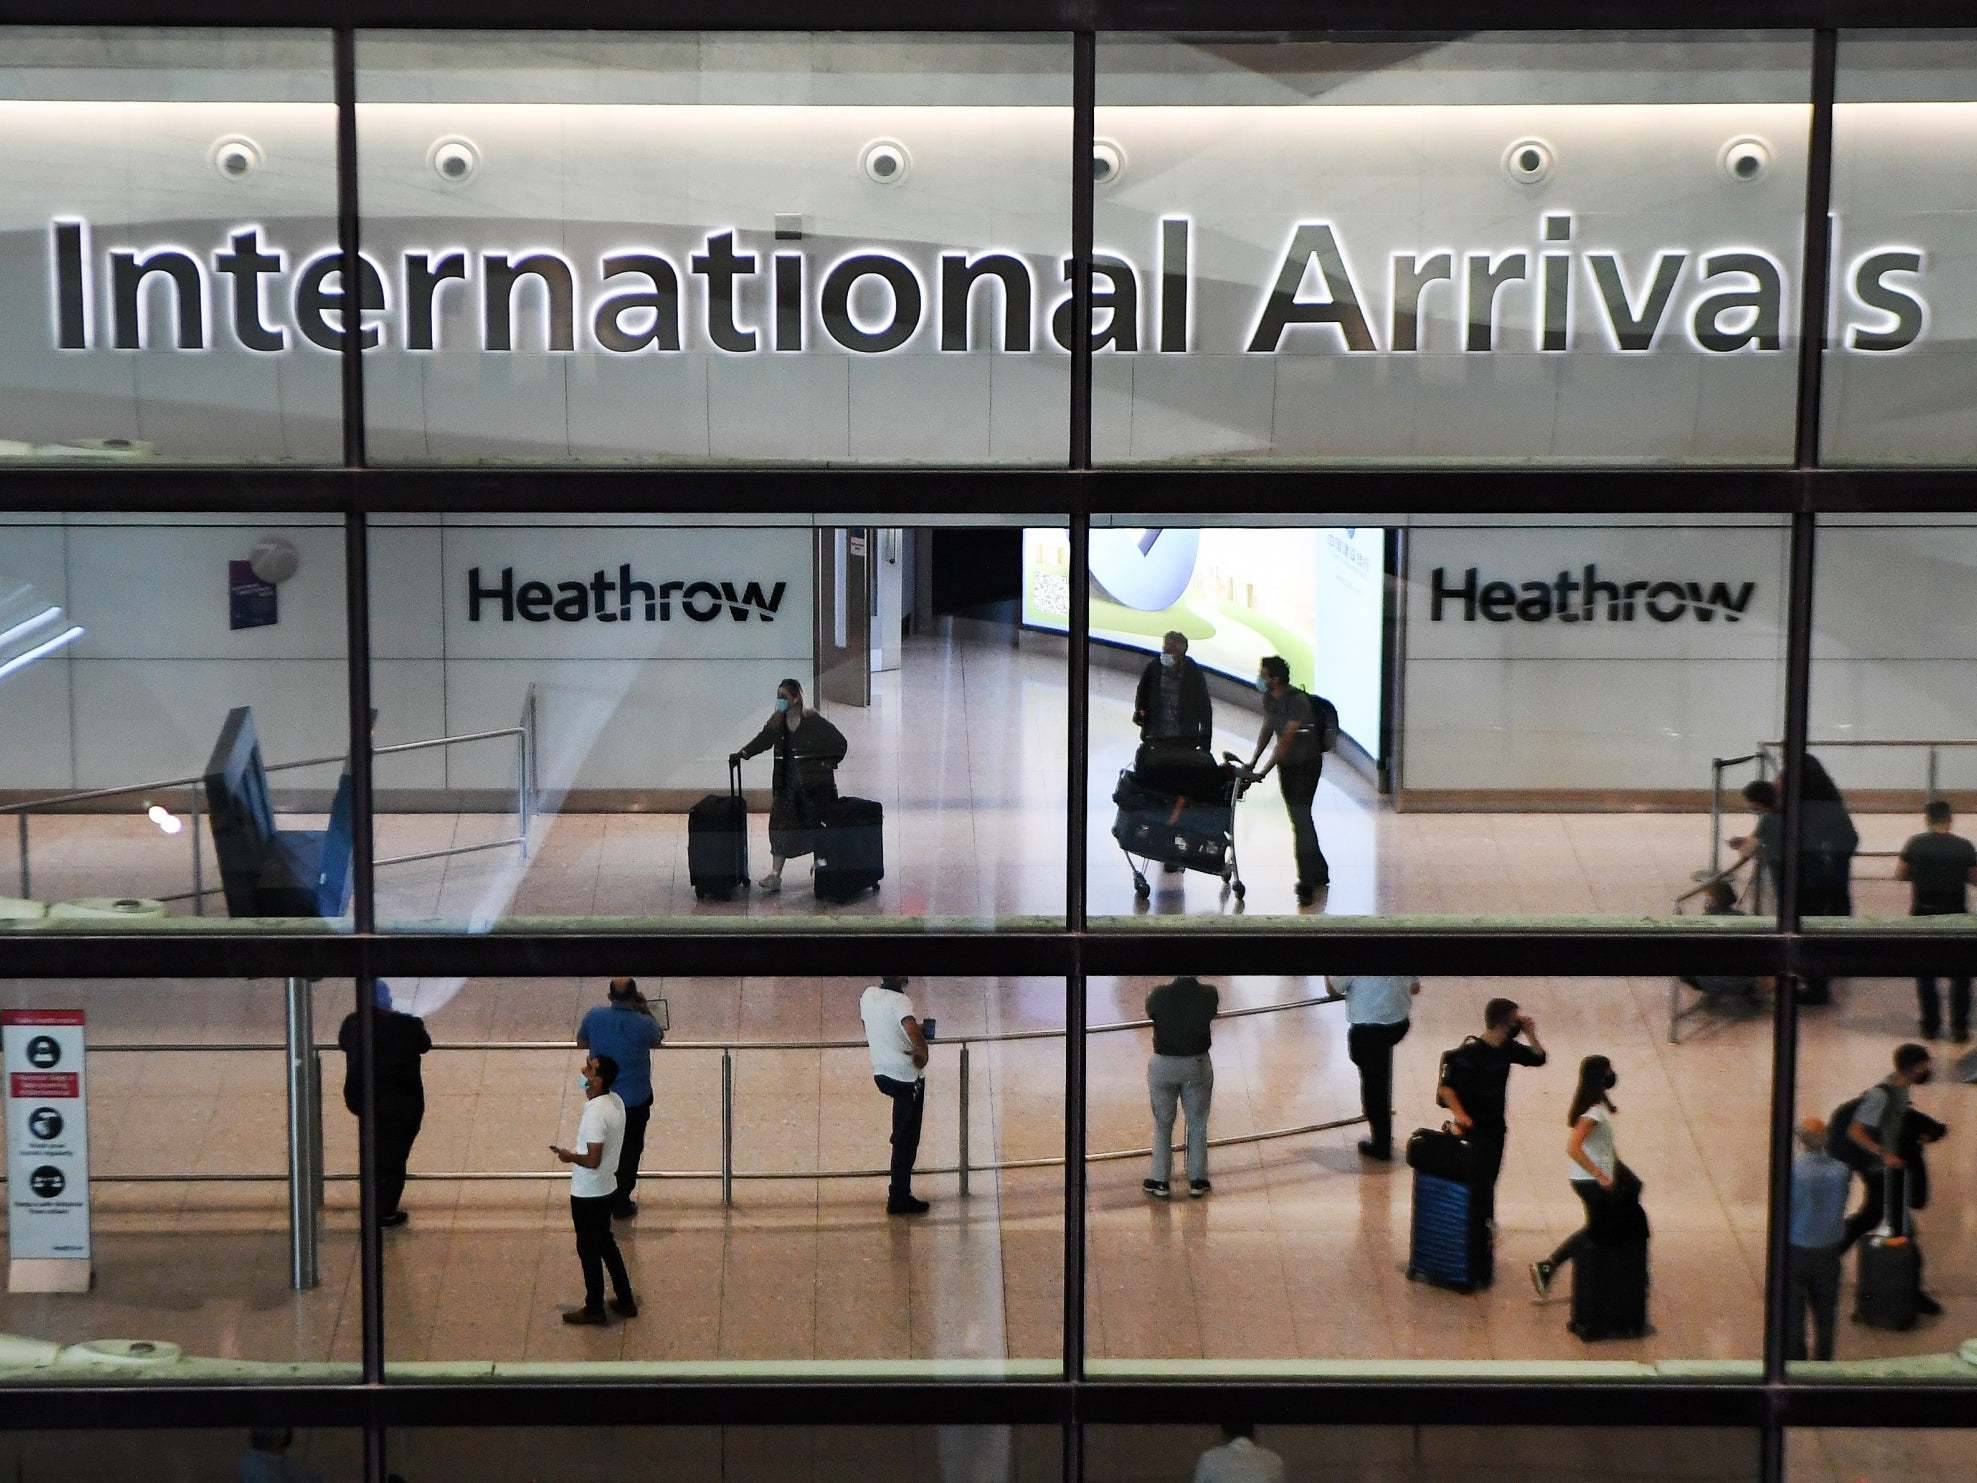 Heathrow passenger numbers are significantly down compared to previous years